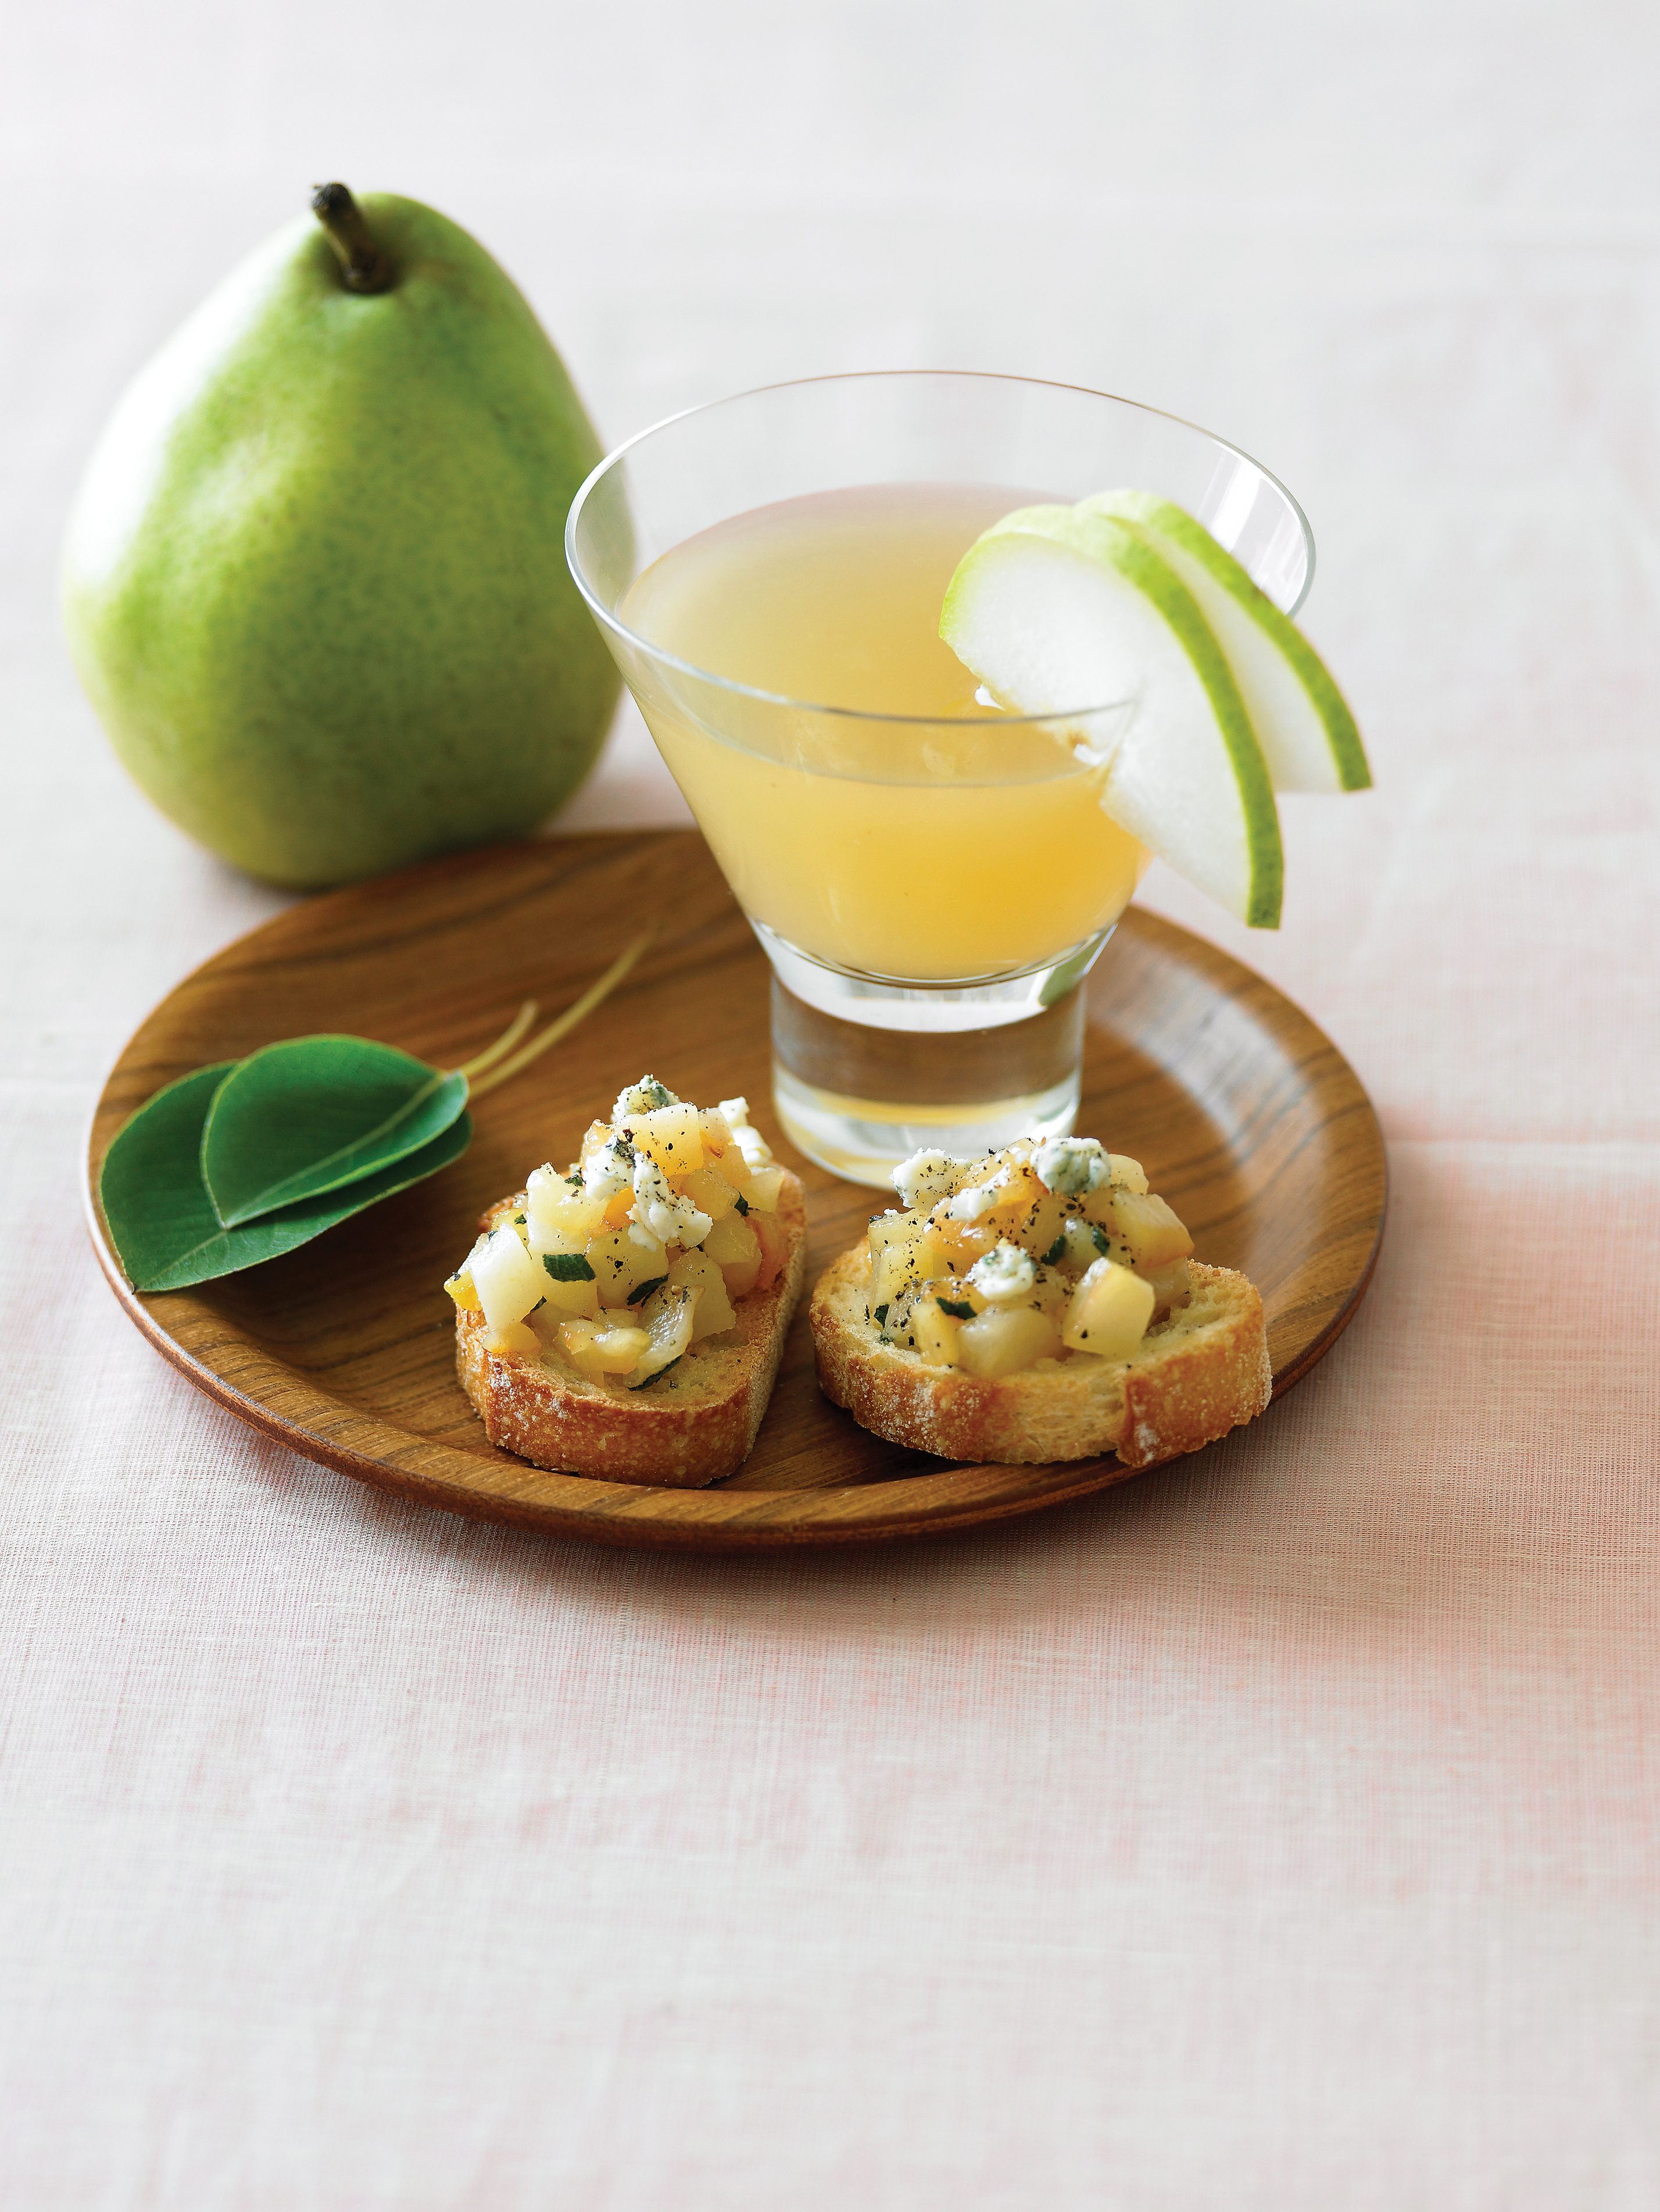 30 Ways with Pears